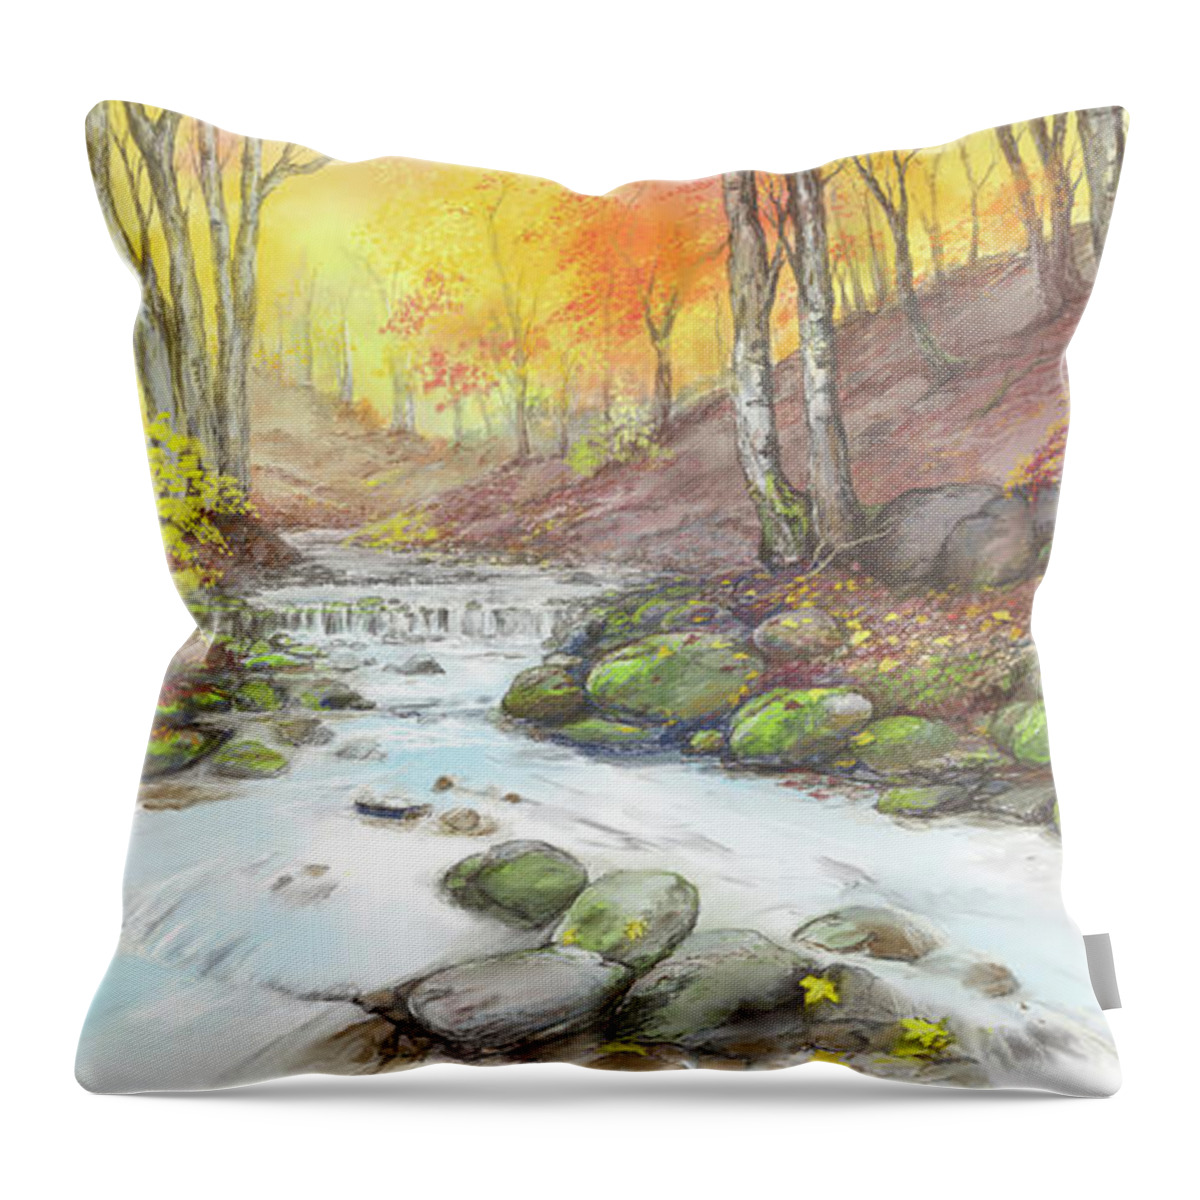 Fall Throw Pillow featuring the digital art Fall Streaming by Scott Stafstrom